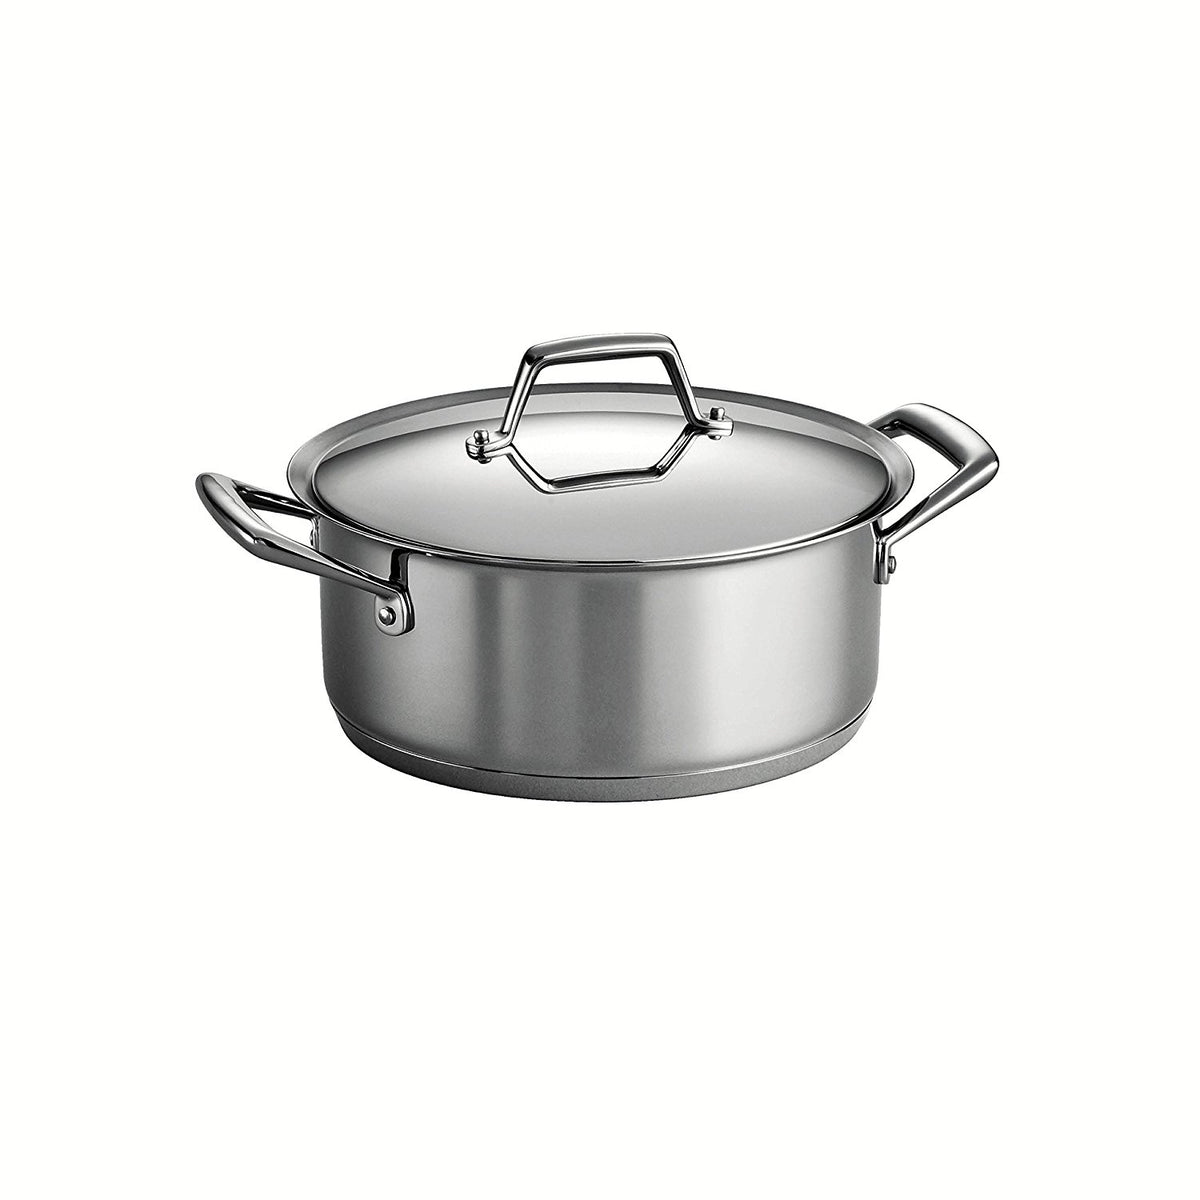 Tramontina 80101-016DS 6QT Gourmet Prima 18/10 Tri-Ply Base Covered Sauce Pot, Stainless Steel - Induction Ready, Dishwasher Safe, Oven Safe COOKPOT